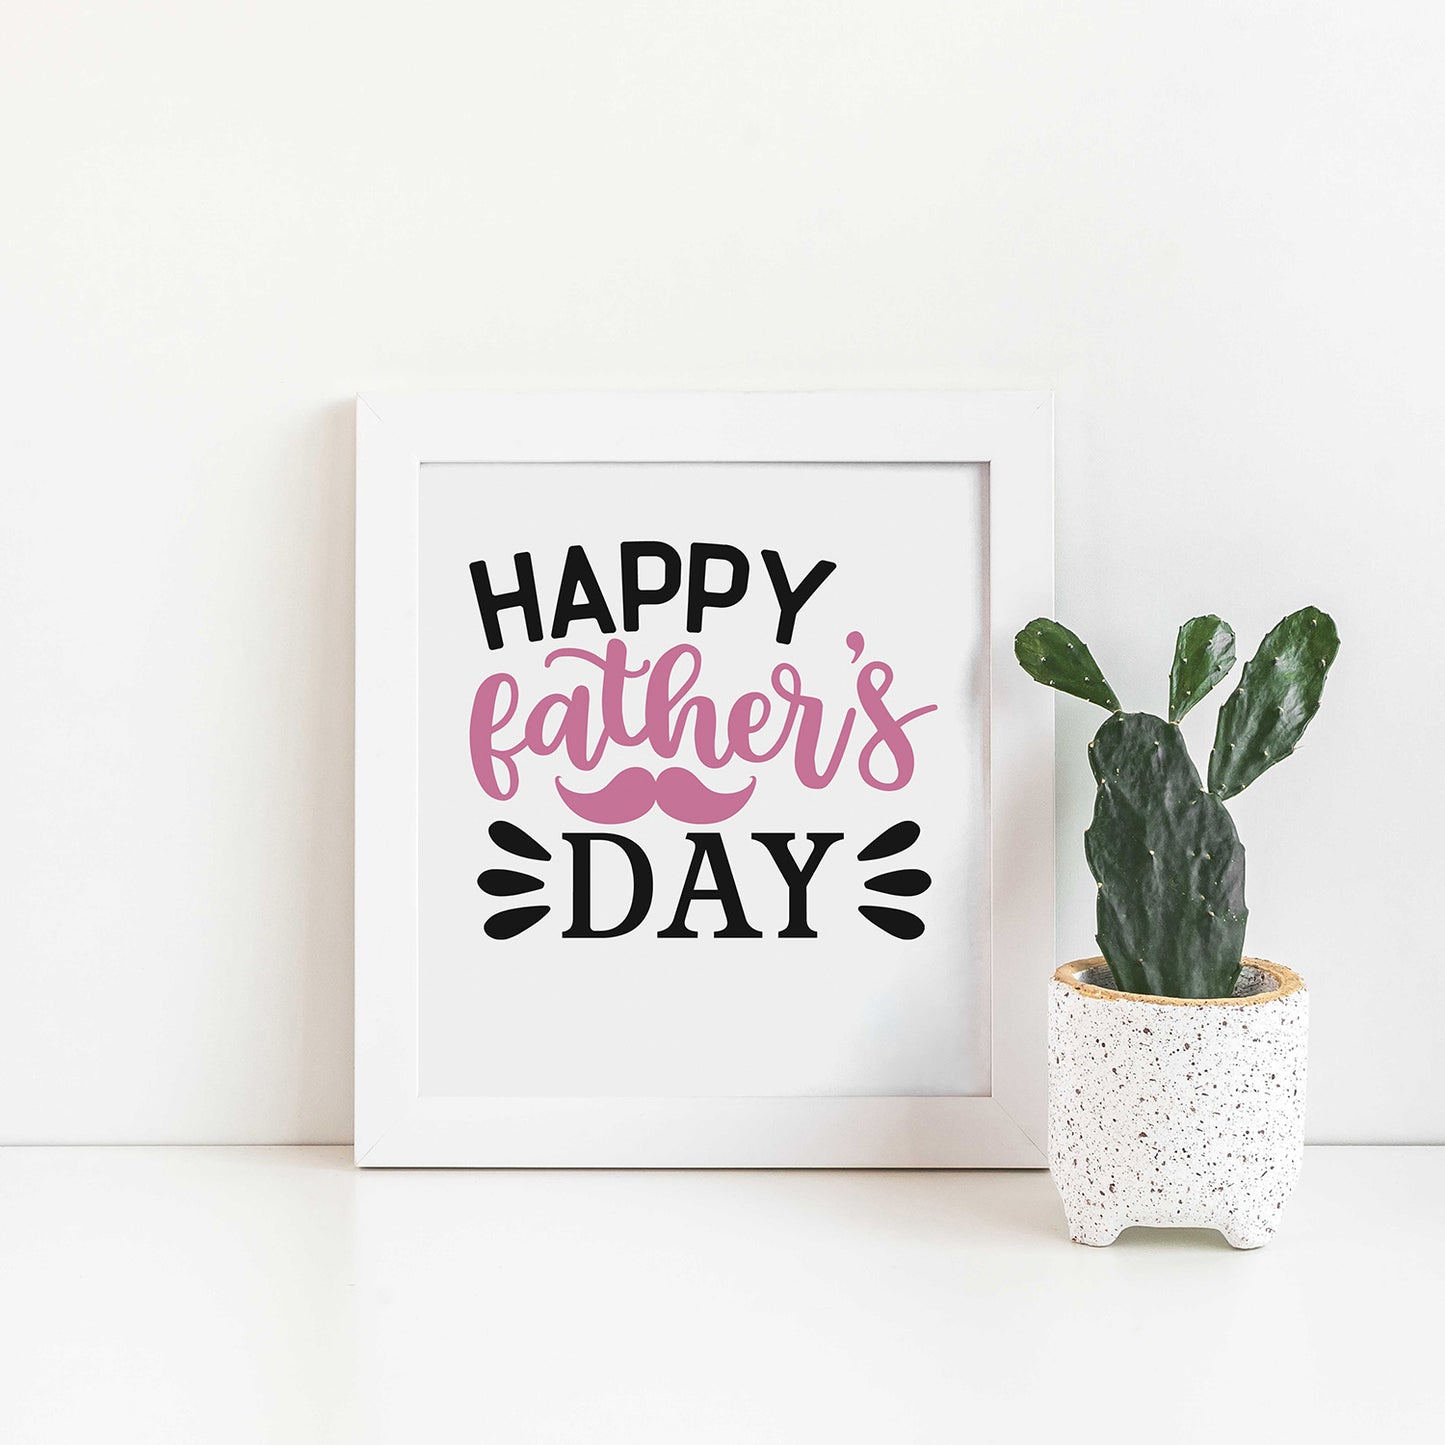 "Happy Father's Day" With Mustache Graphic